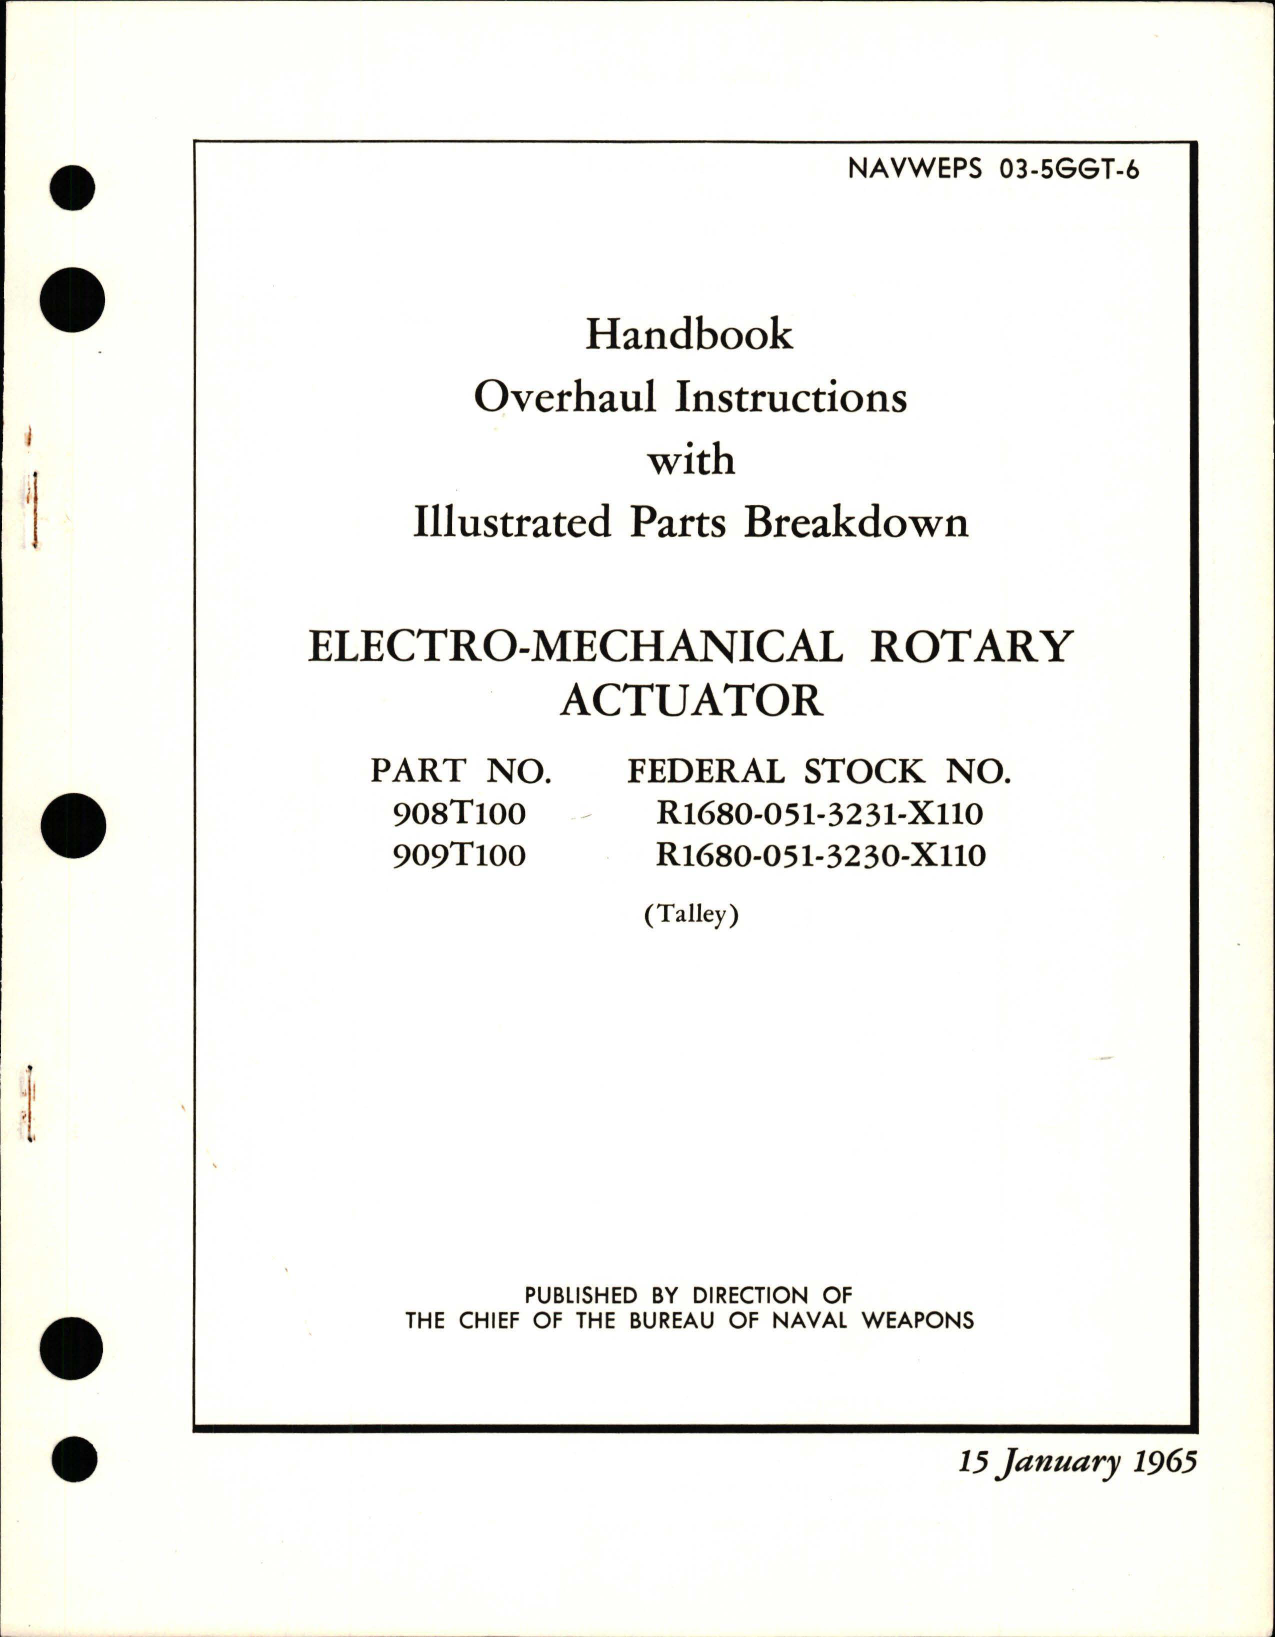 Sample page 1 from AirCorps Library document: Overhaul Instructions with Illustrated Parts Breakdown for Electro-Mechanical Rotary Actuator - Parts 908T100 and 909T100